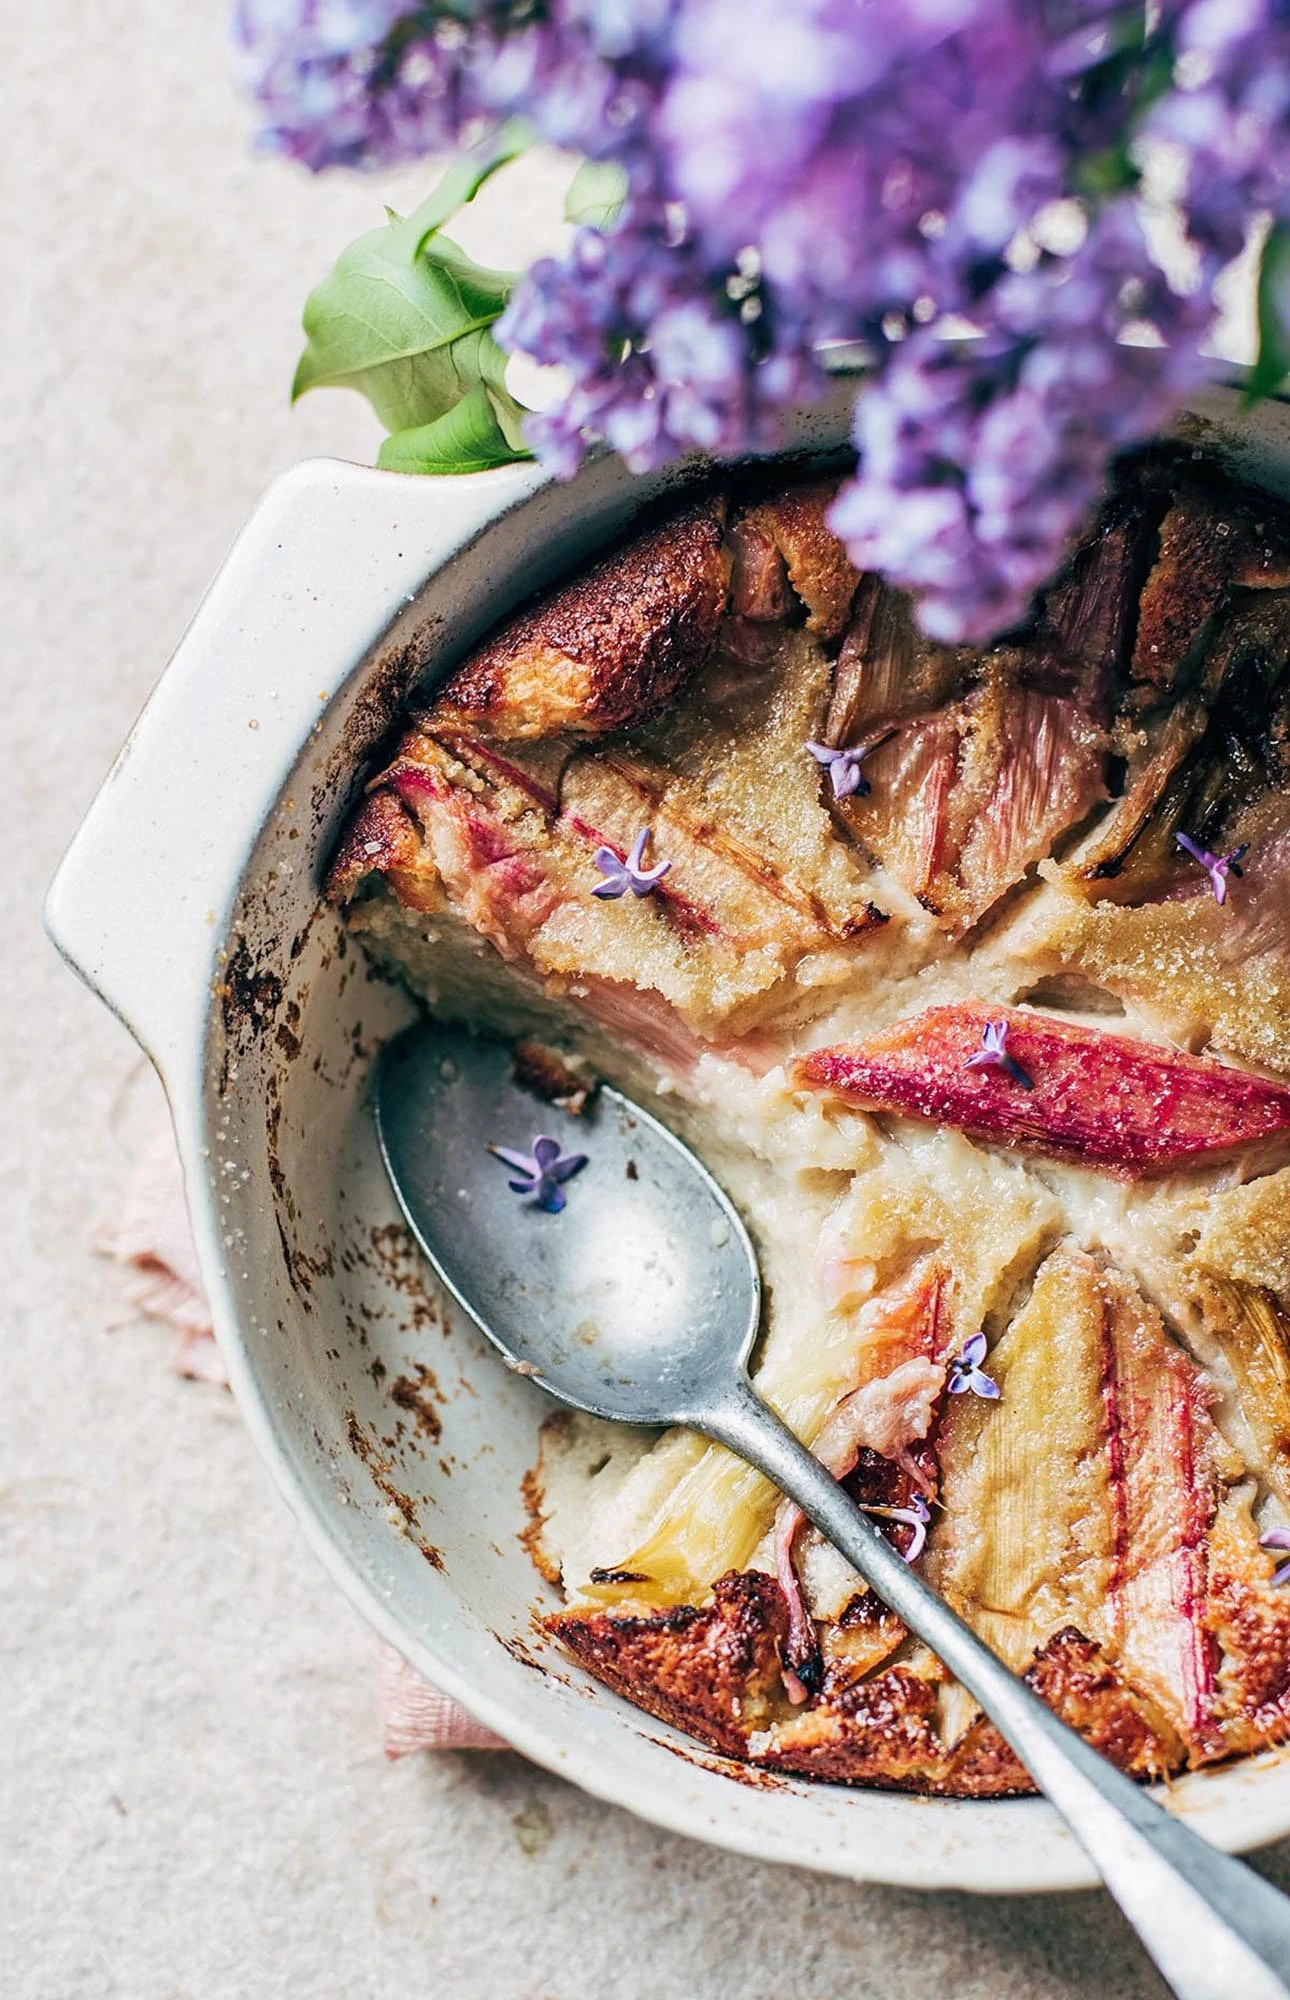 Rhubarb Clafoutis by Baked the Blog